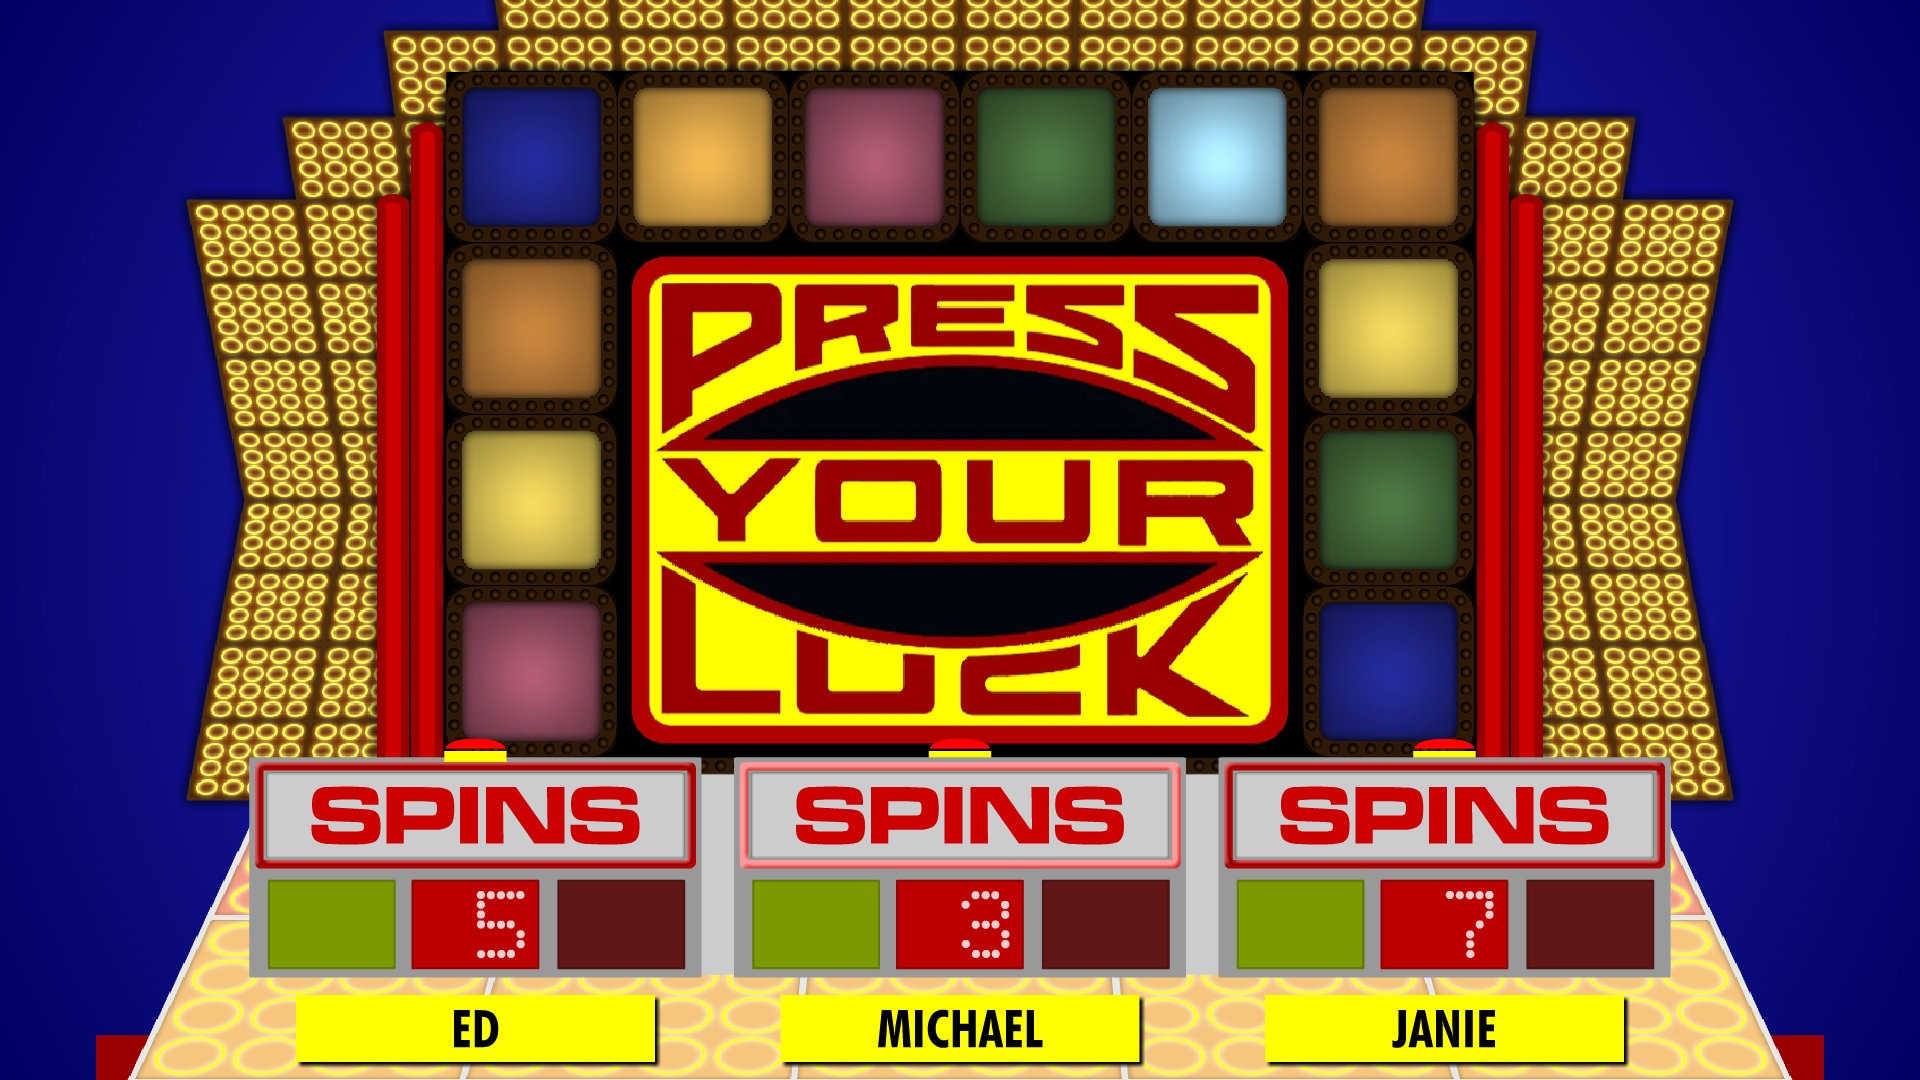 Press Your Luck Game Show Software Etsy